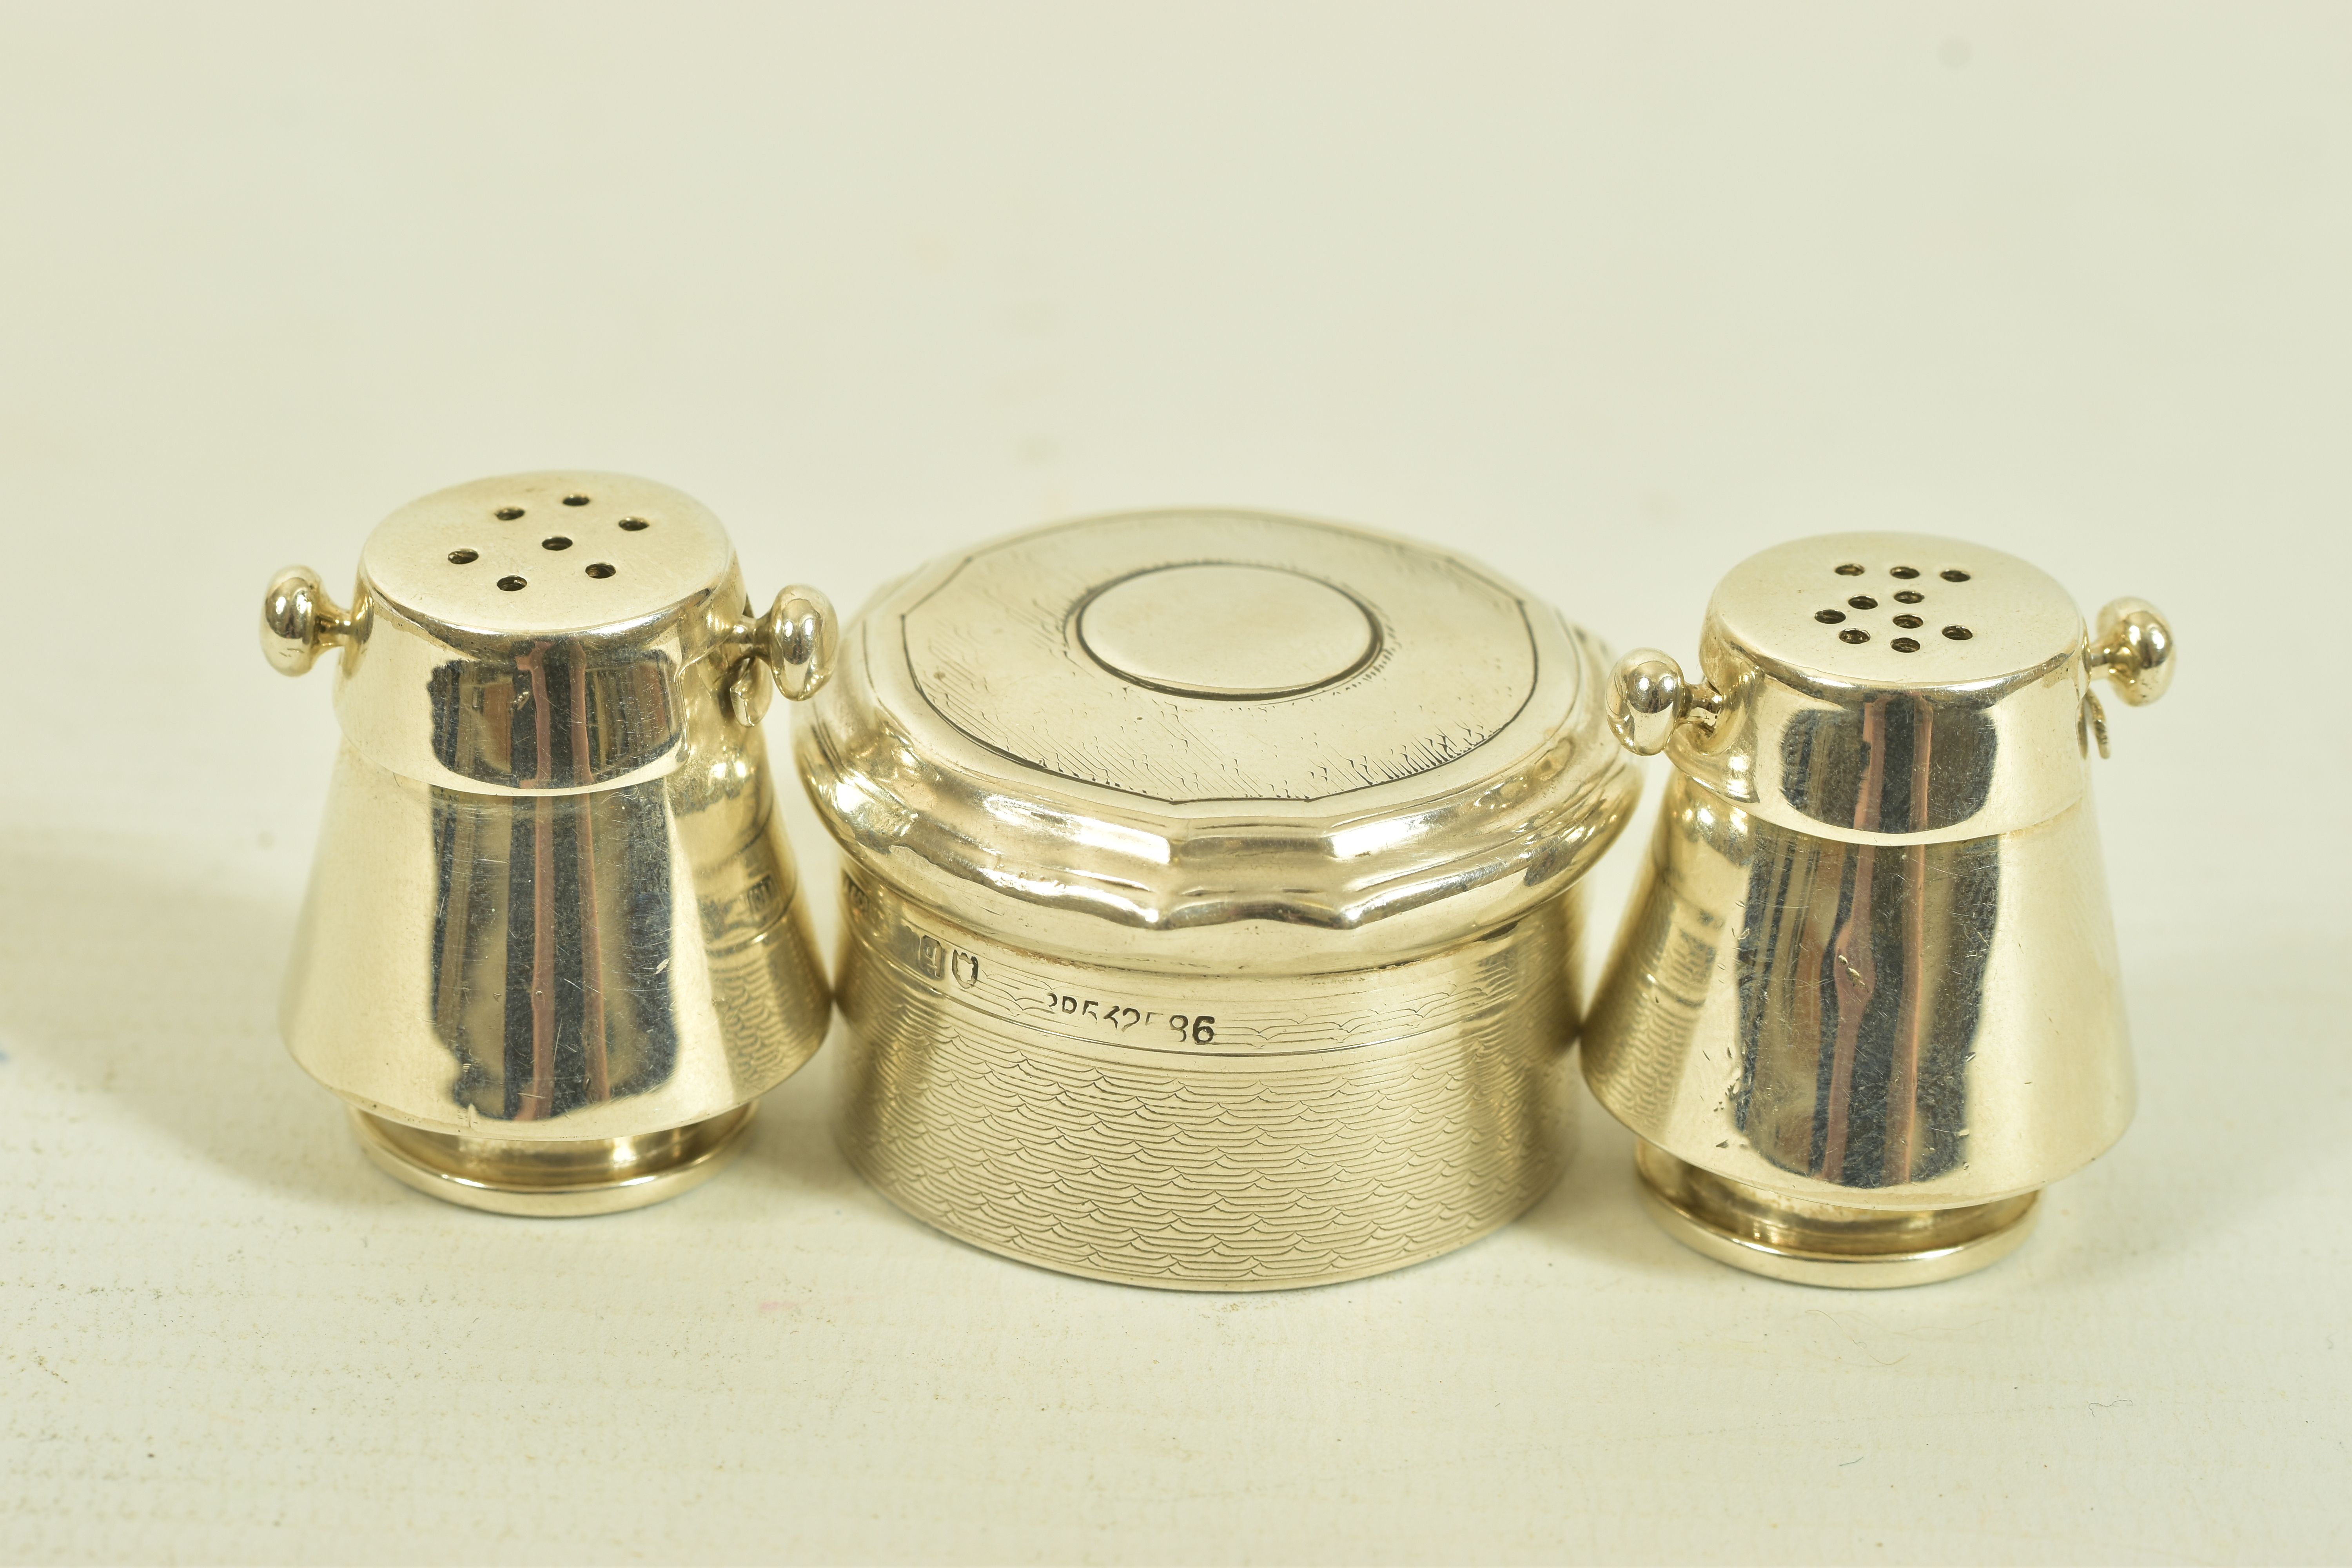 A PAIR OF NOVELTY SALT AND PEPPER POTS, TOGETHER WITH AN EARLY 20TH CENTURY SILVER ASPREY & CO. PILL